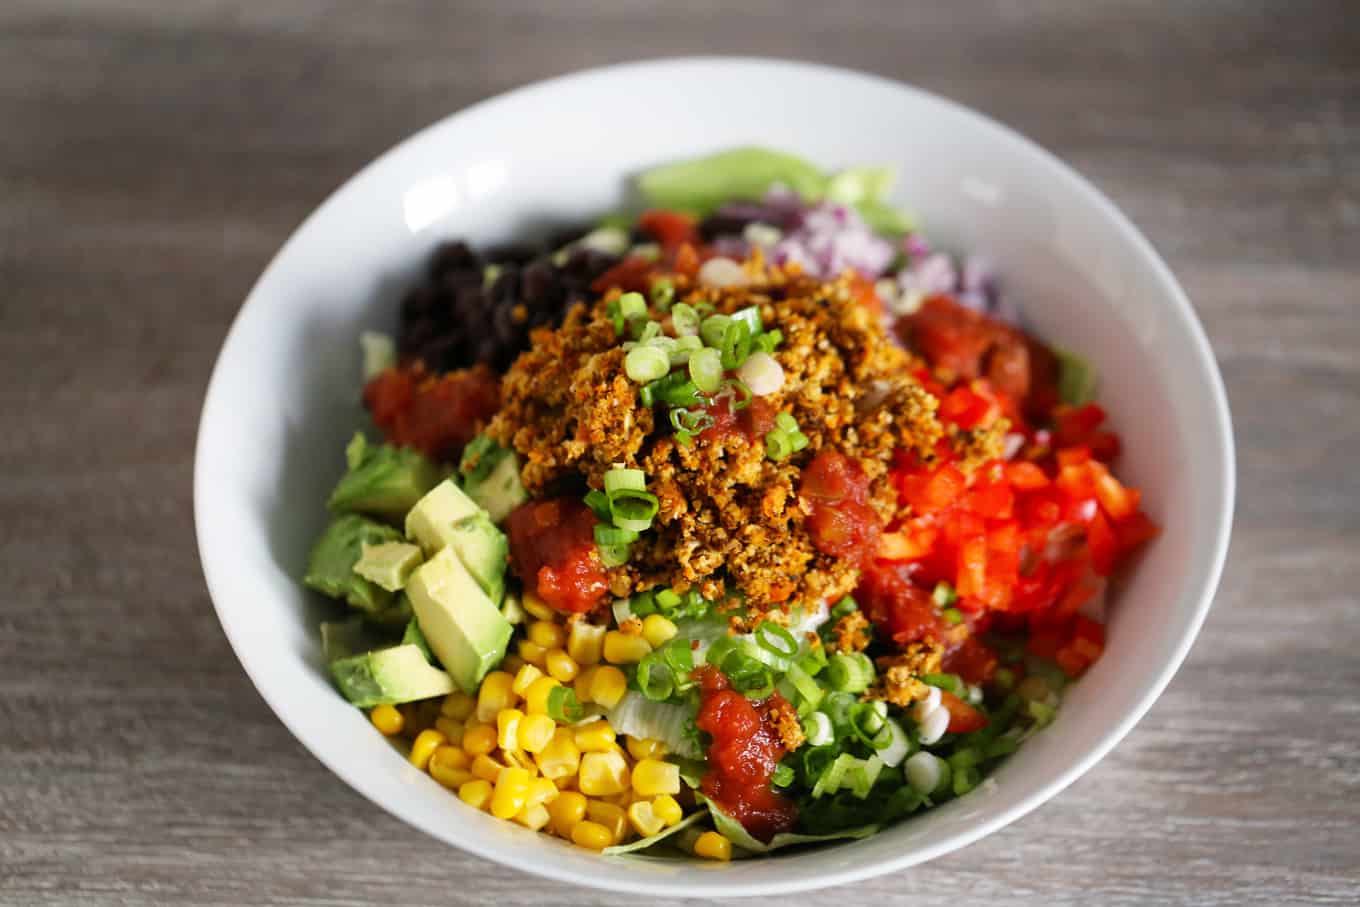 A bowl of vegan taco meat and an array of delicious fresh vegetables.